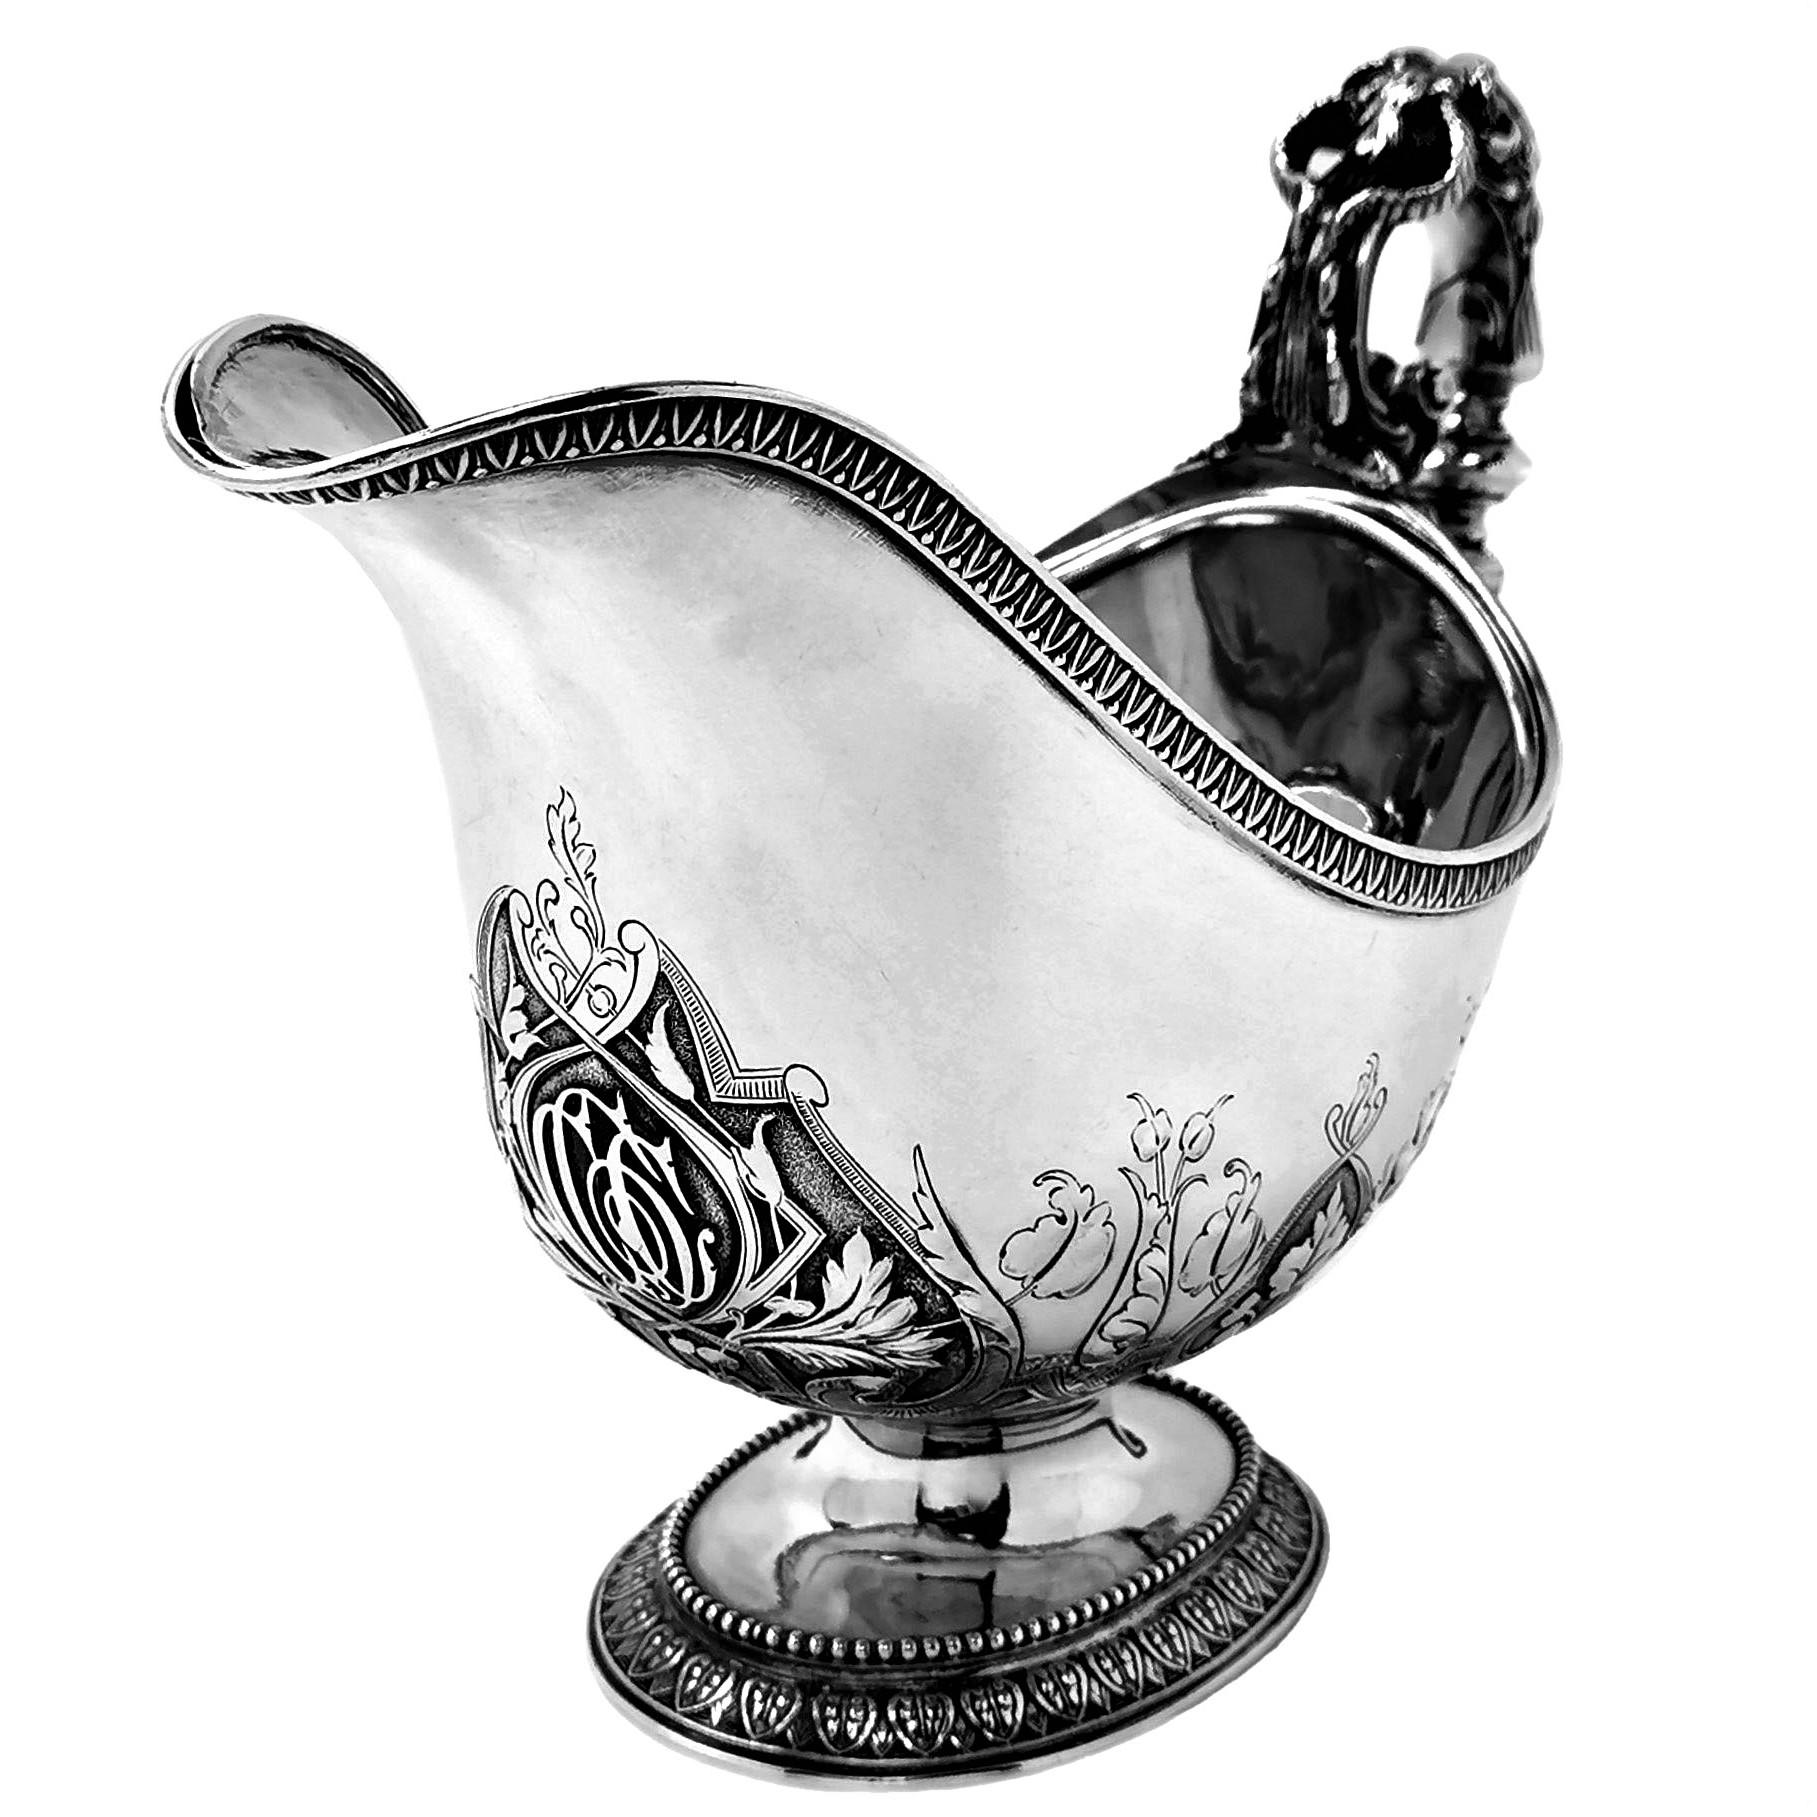 An impressive Antique Victorian Solid Silver Sauce Boat with removable Solid Silver Liner, This Gravy Boat is of substantial size and good weight. It features a magnificent decorative handle cast with a horned face and scroll decorations. The Body